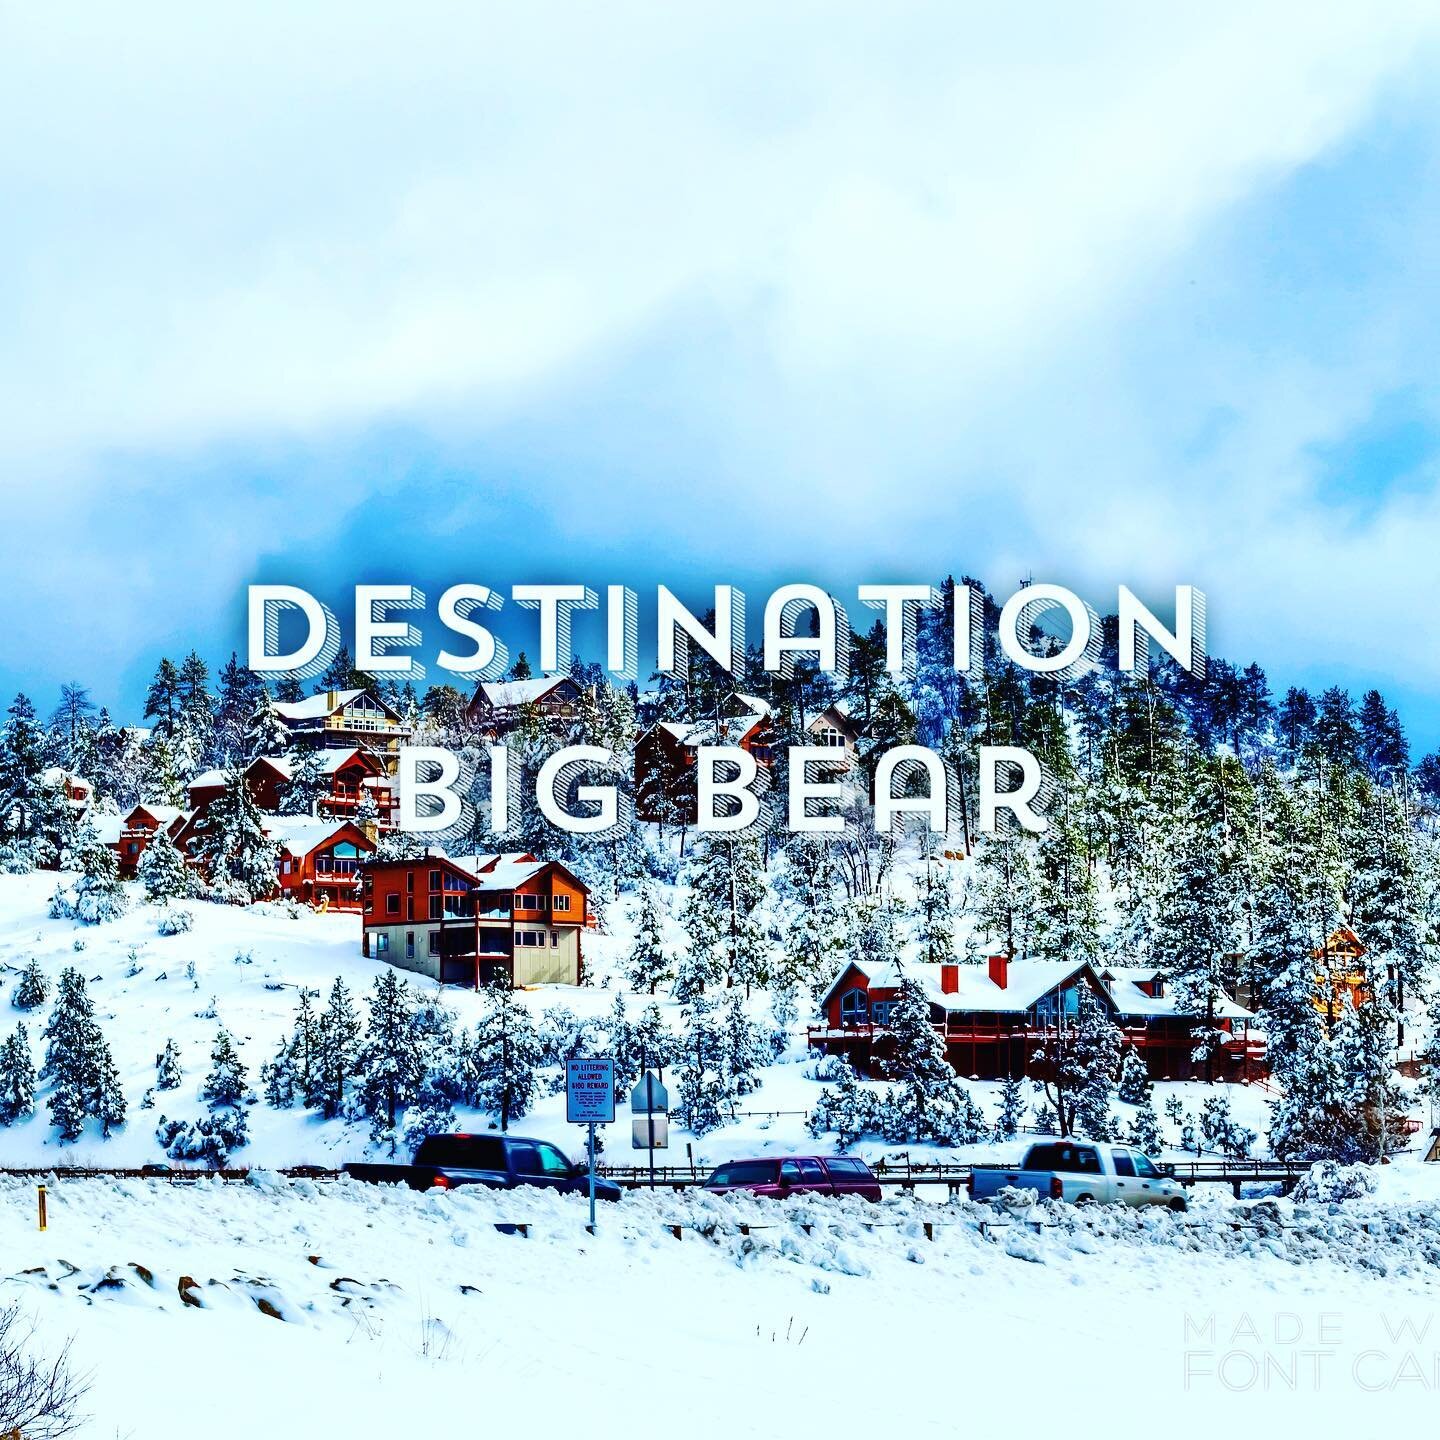 Discover Big Bear winter beauty. Perfect time to snap an travel trailer and spend the weekend in snow. Check out our website with camp locations and availability #rvshare #outdoorsy #california #californiawilderness #glamping #glampingcalifornia #gla